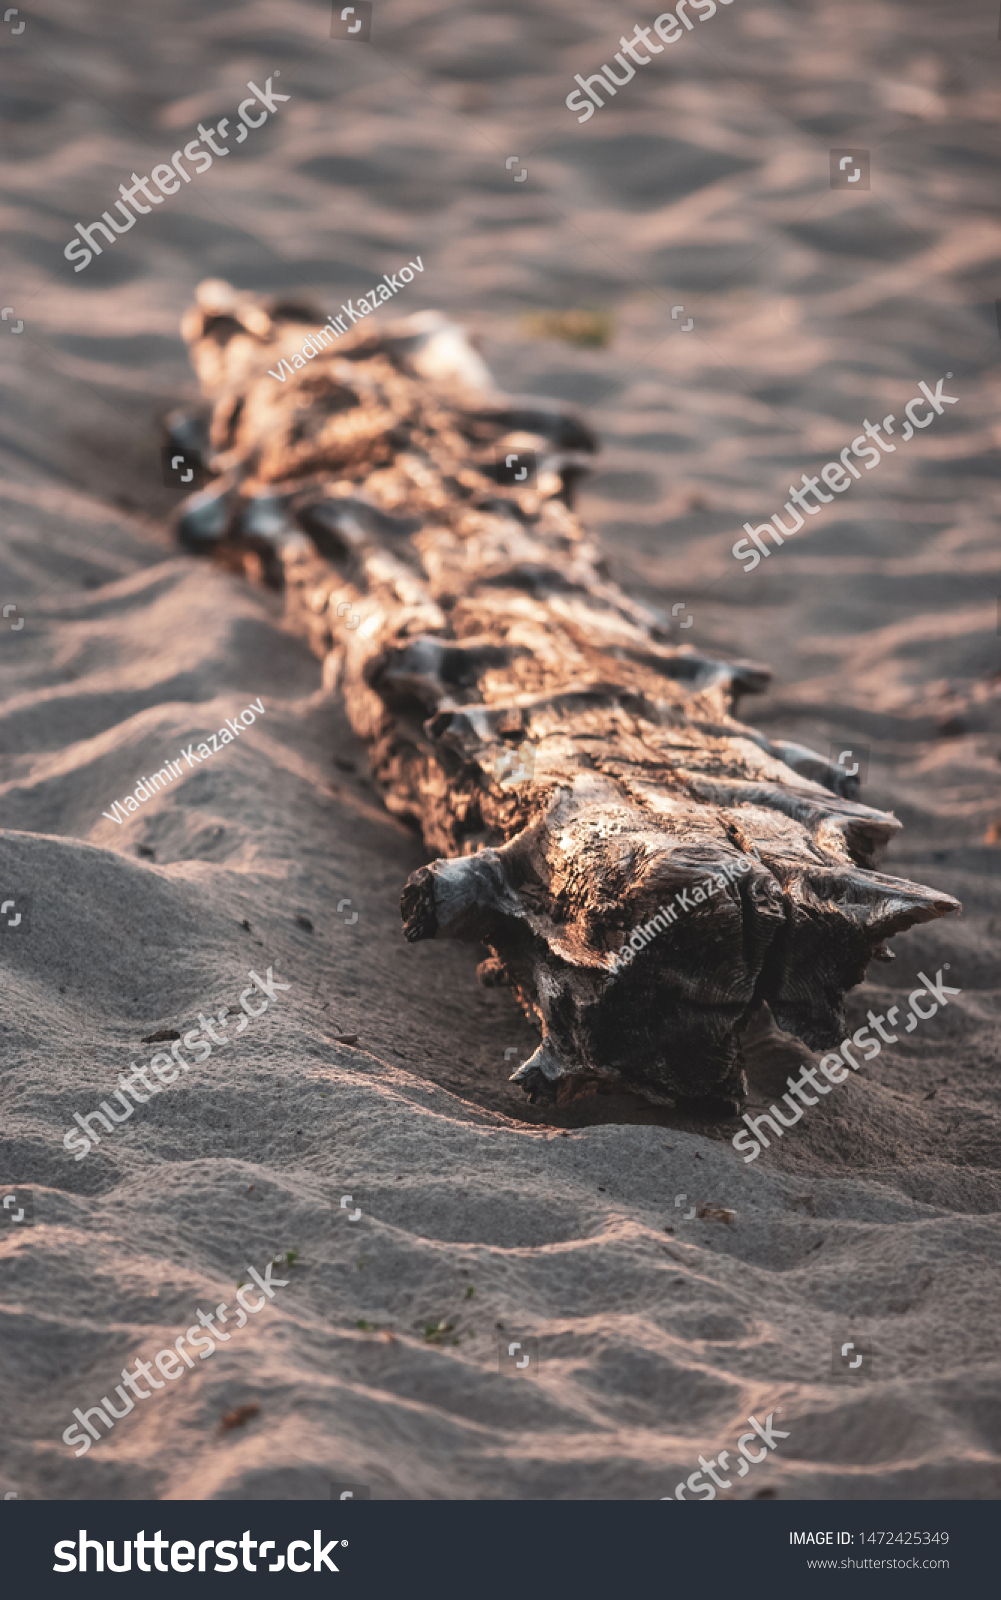 A dry old log lies in the sand. The tree is lit by the sun. Selective focus. The background is blurry. Vertical frame. #1472425349